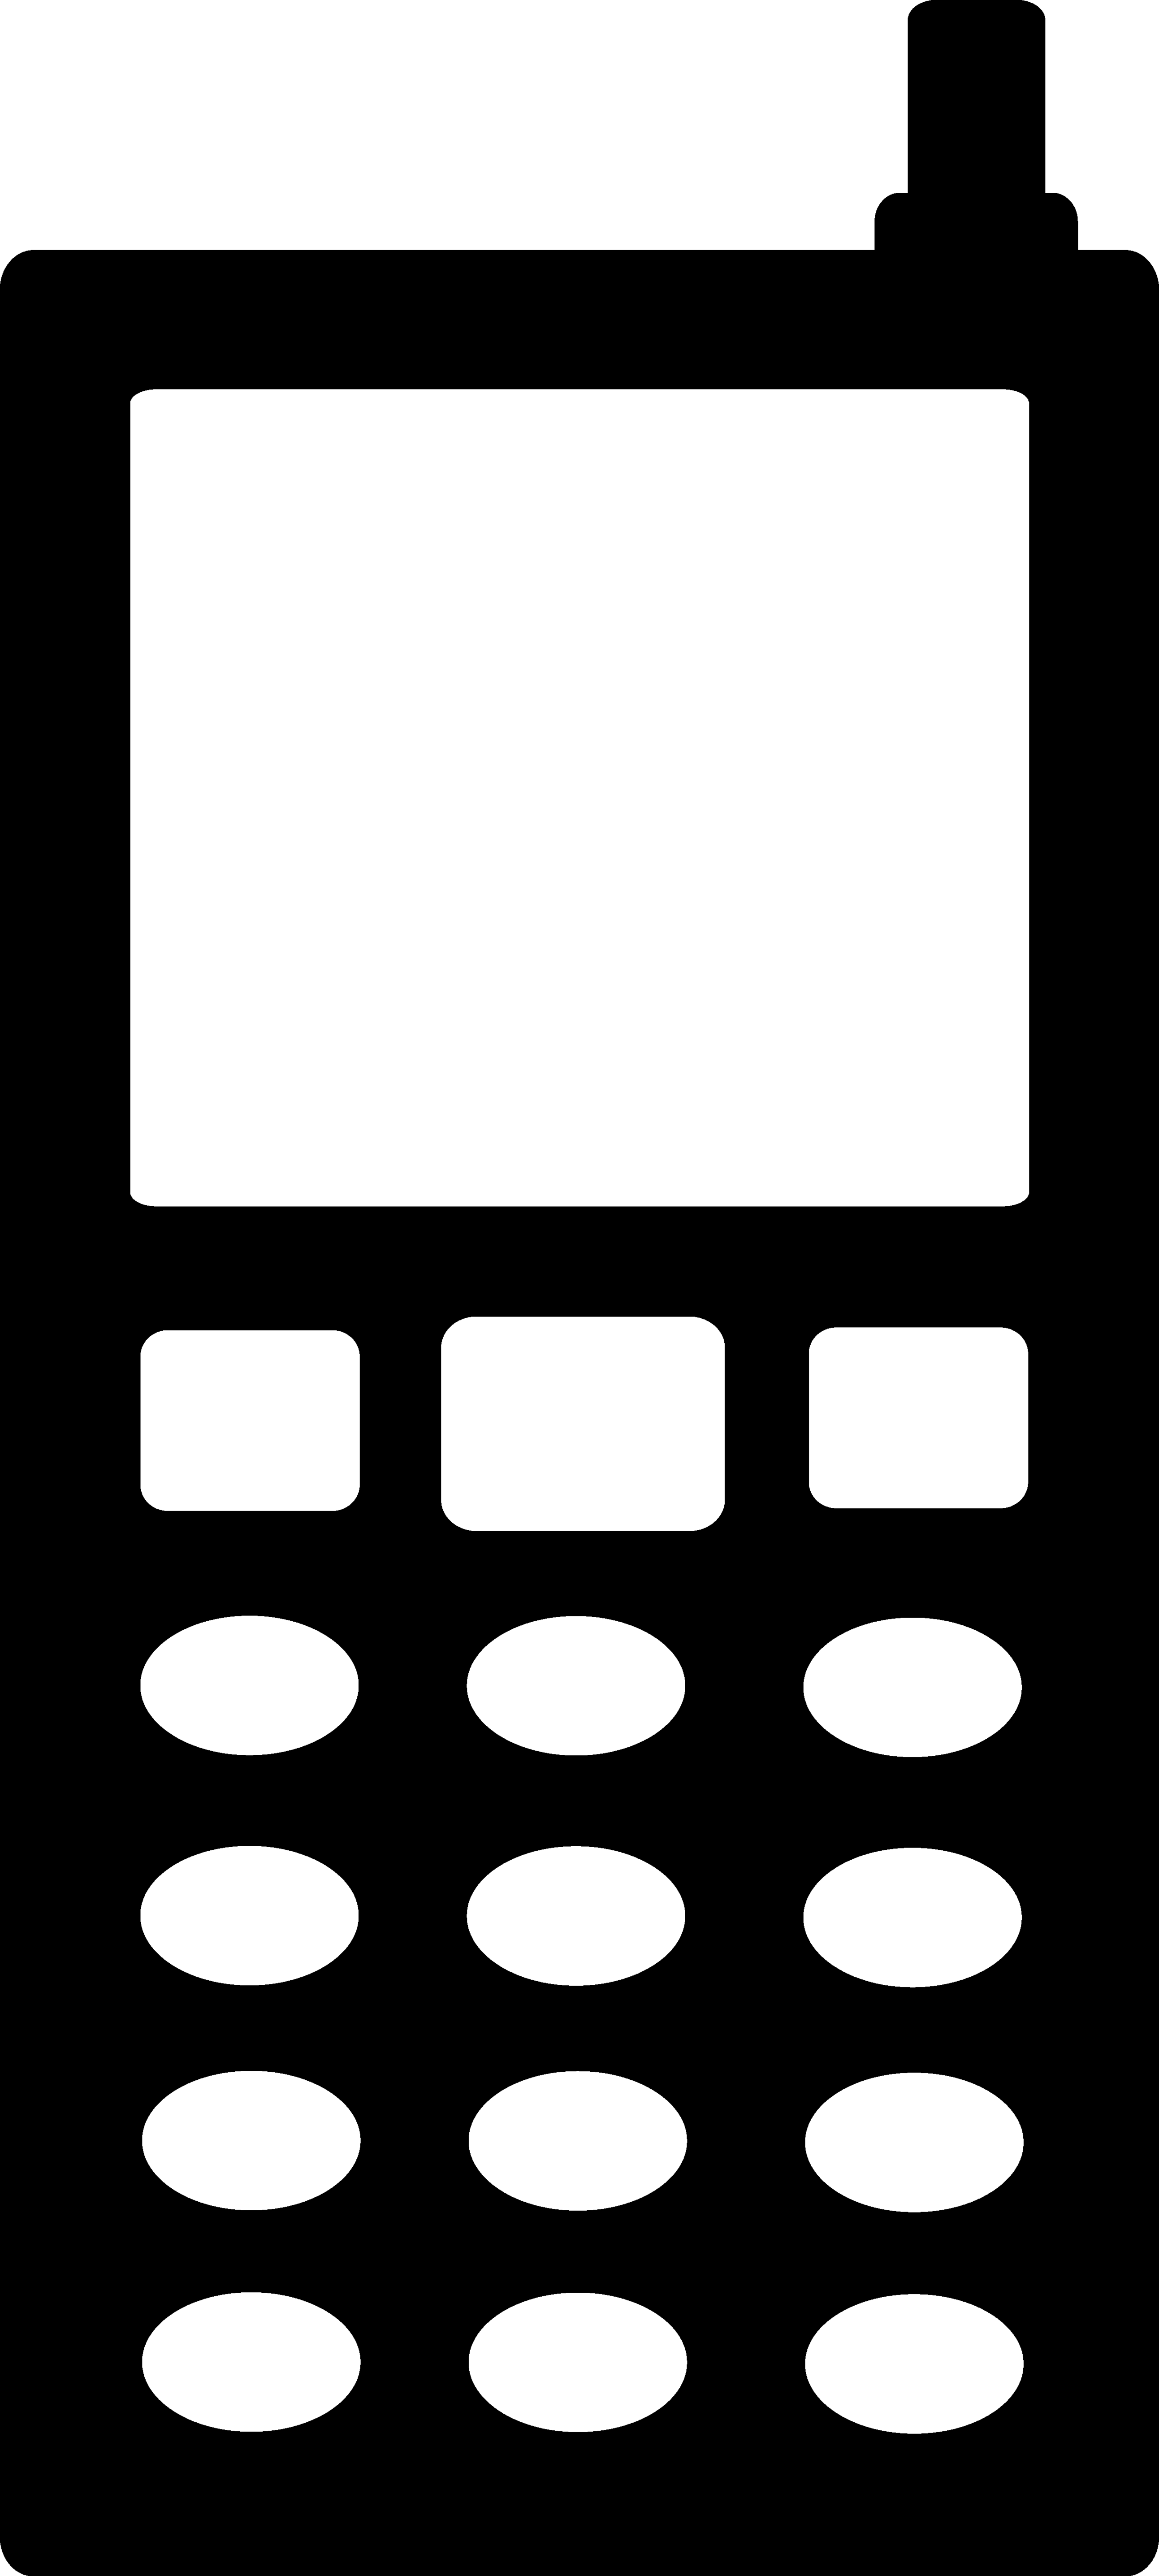 mobile phone clipart black and white - photo #13